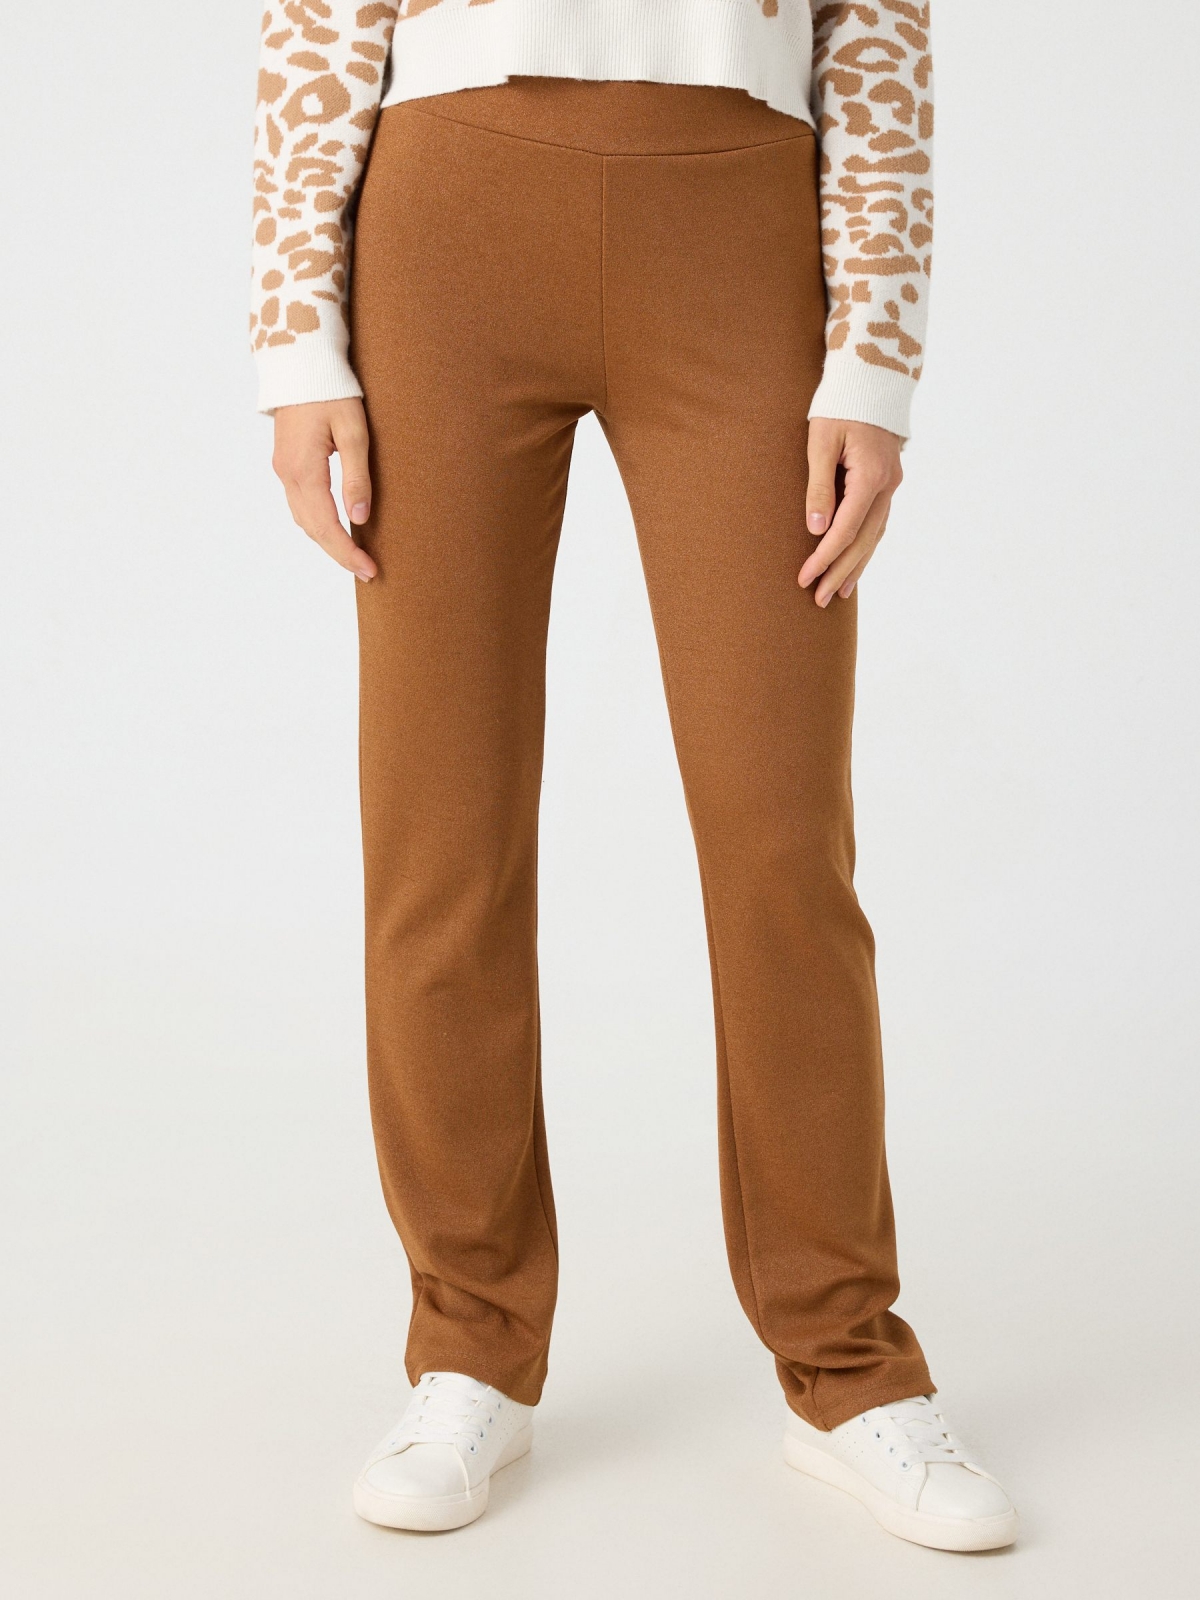 Elastic waist dress pants brown middle front view